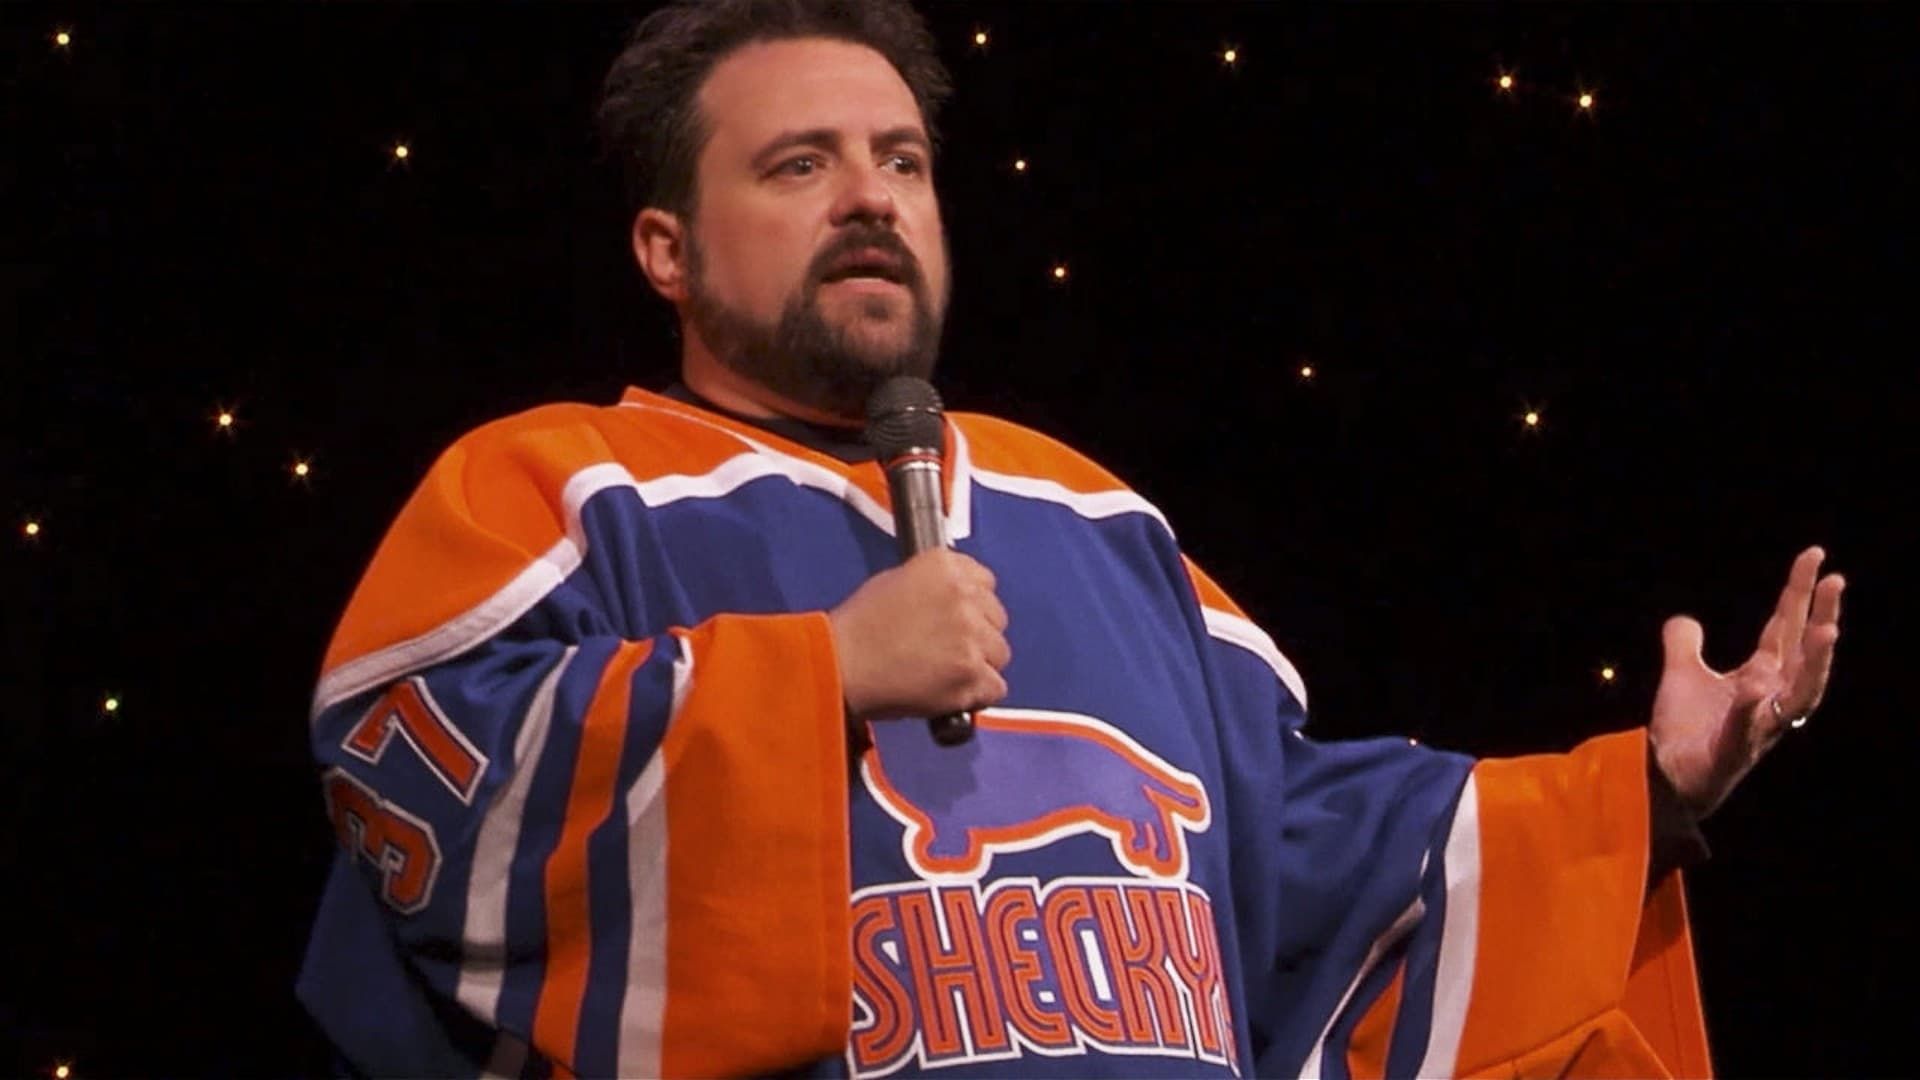 Kevin Smith: Burn in Hell background